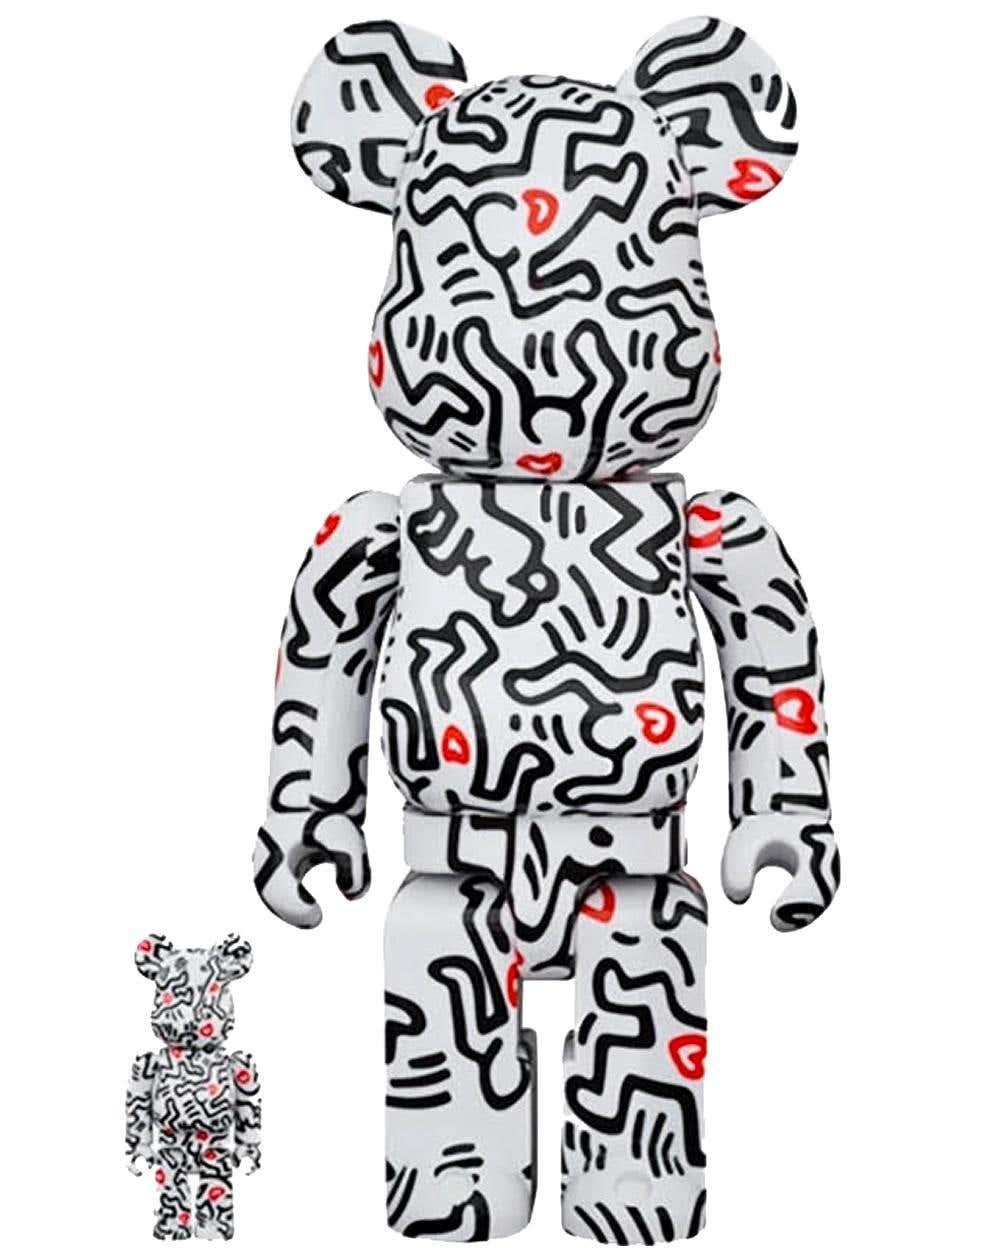 Basquiat Keith Haring Bearbrick 400% set of 2 works (Basquiat Haring BE@RBRICK) - Pop Art Print by after Jean-Michel Basquiat